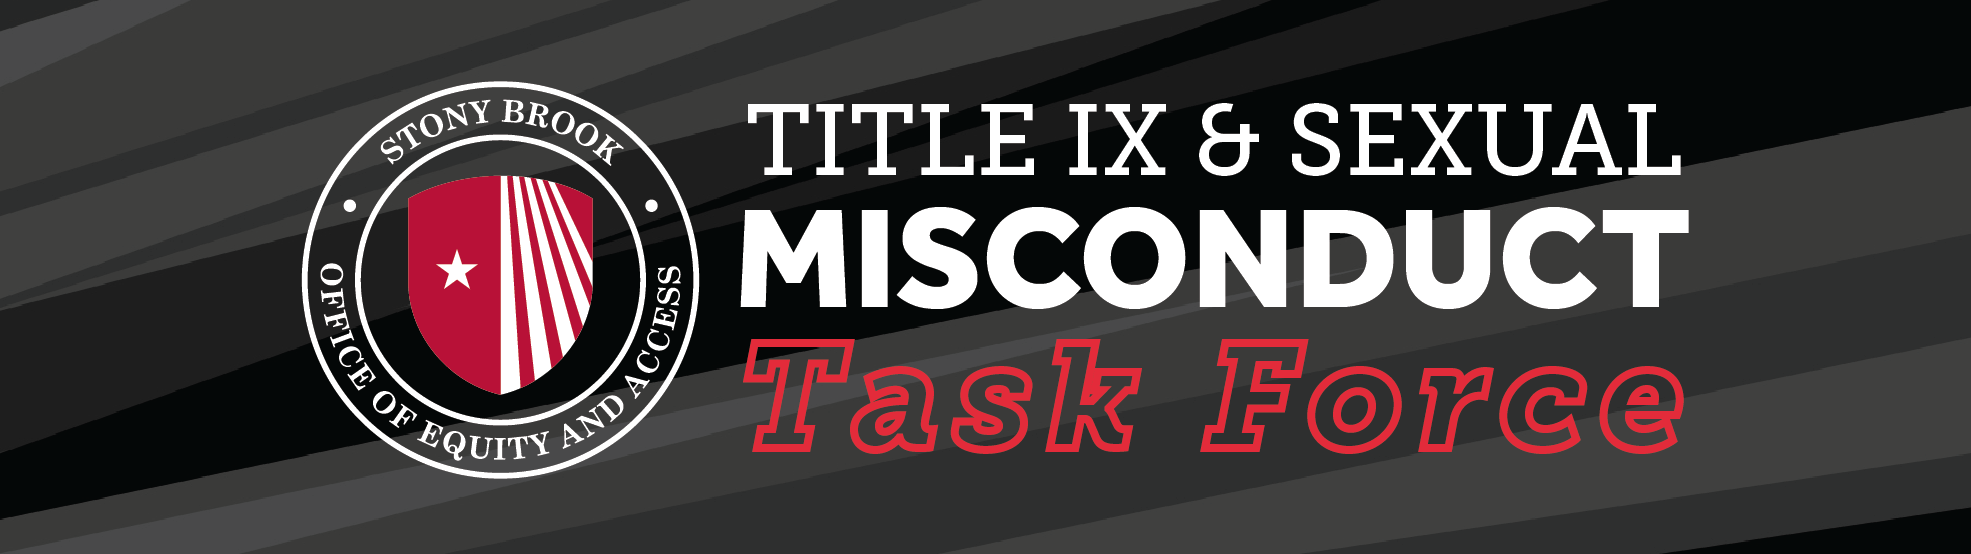 Header 2: Sexual Misconduct / Title IX Task Force